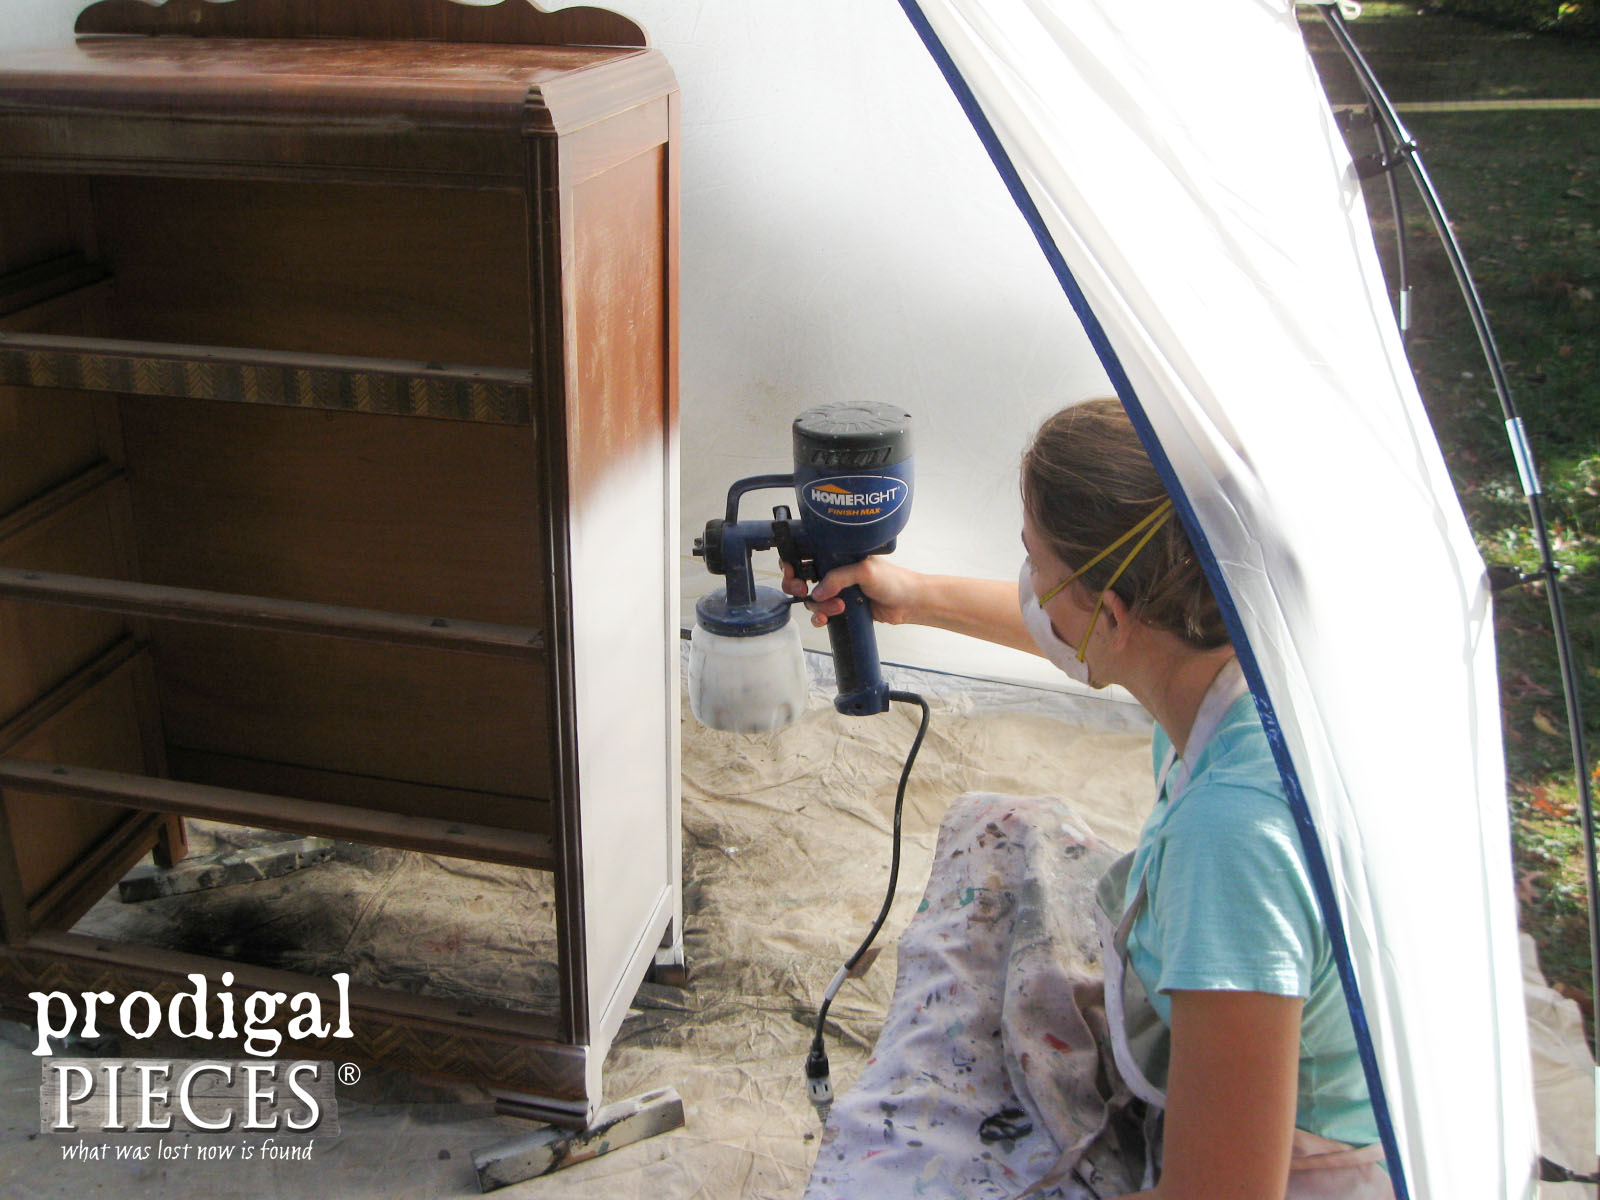 Using the HomeRight Finish Max and Spray Shelter to Paint Furniture | Prodigal Pieces | www.prodigalpieces.com